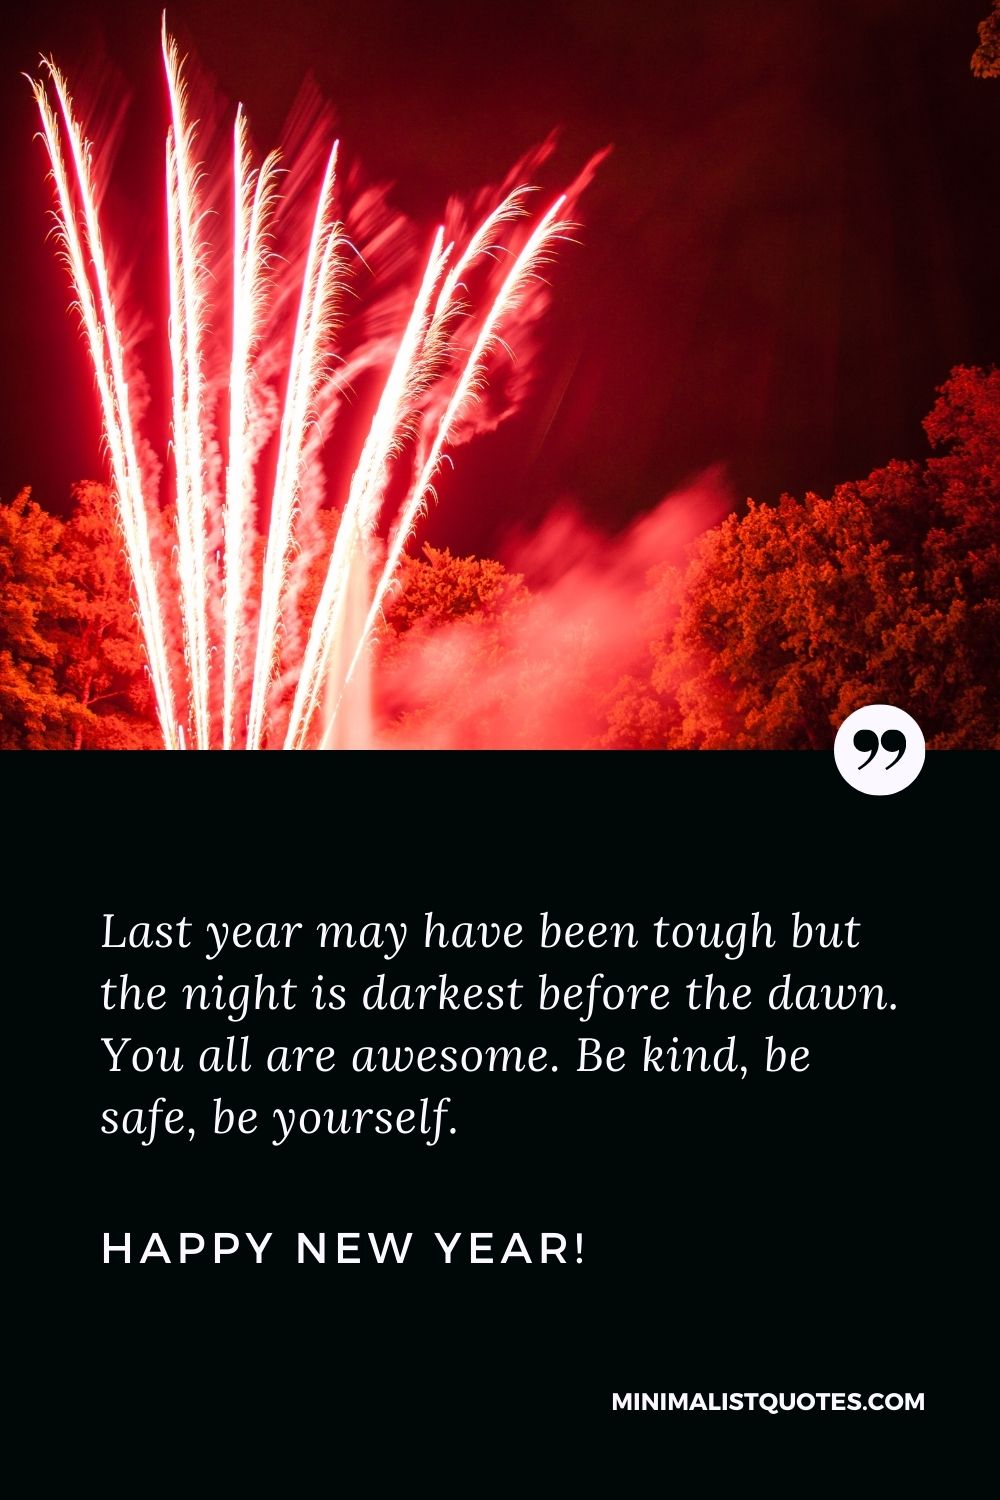 Happy New Year Message Year: Last year may have been tough but the night is darkest before the dawn. You all are awesome. Be kind, be safe, be yourself. Happy New Year!